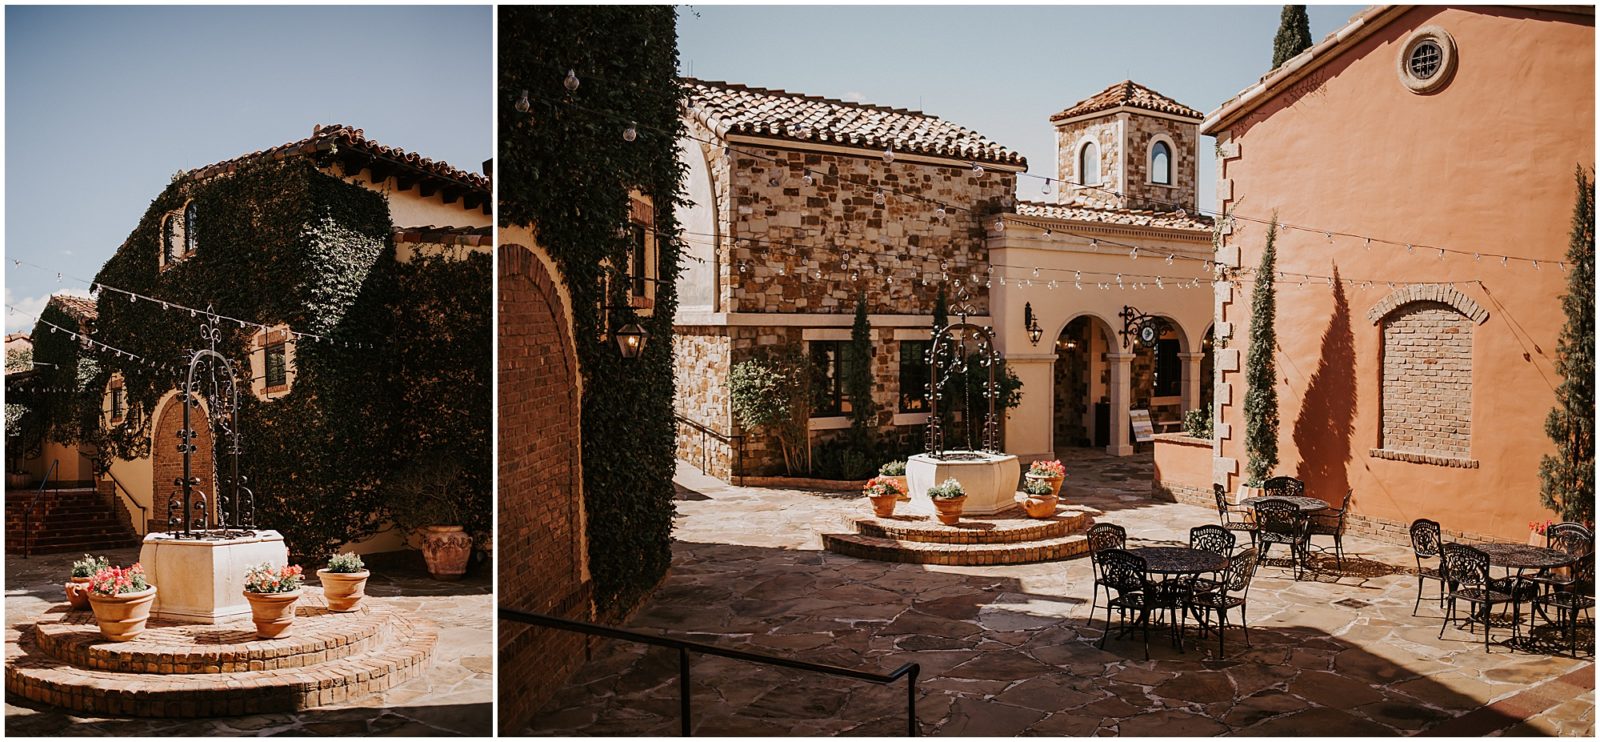 Bella Collina definitely does transport you to a Quaint Tuscany Village